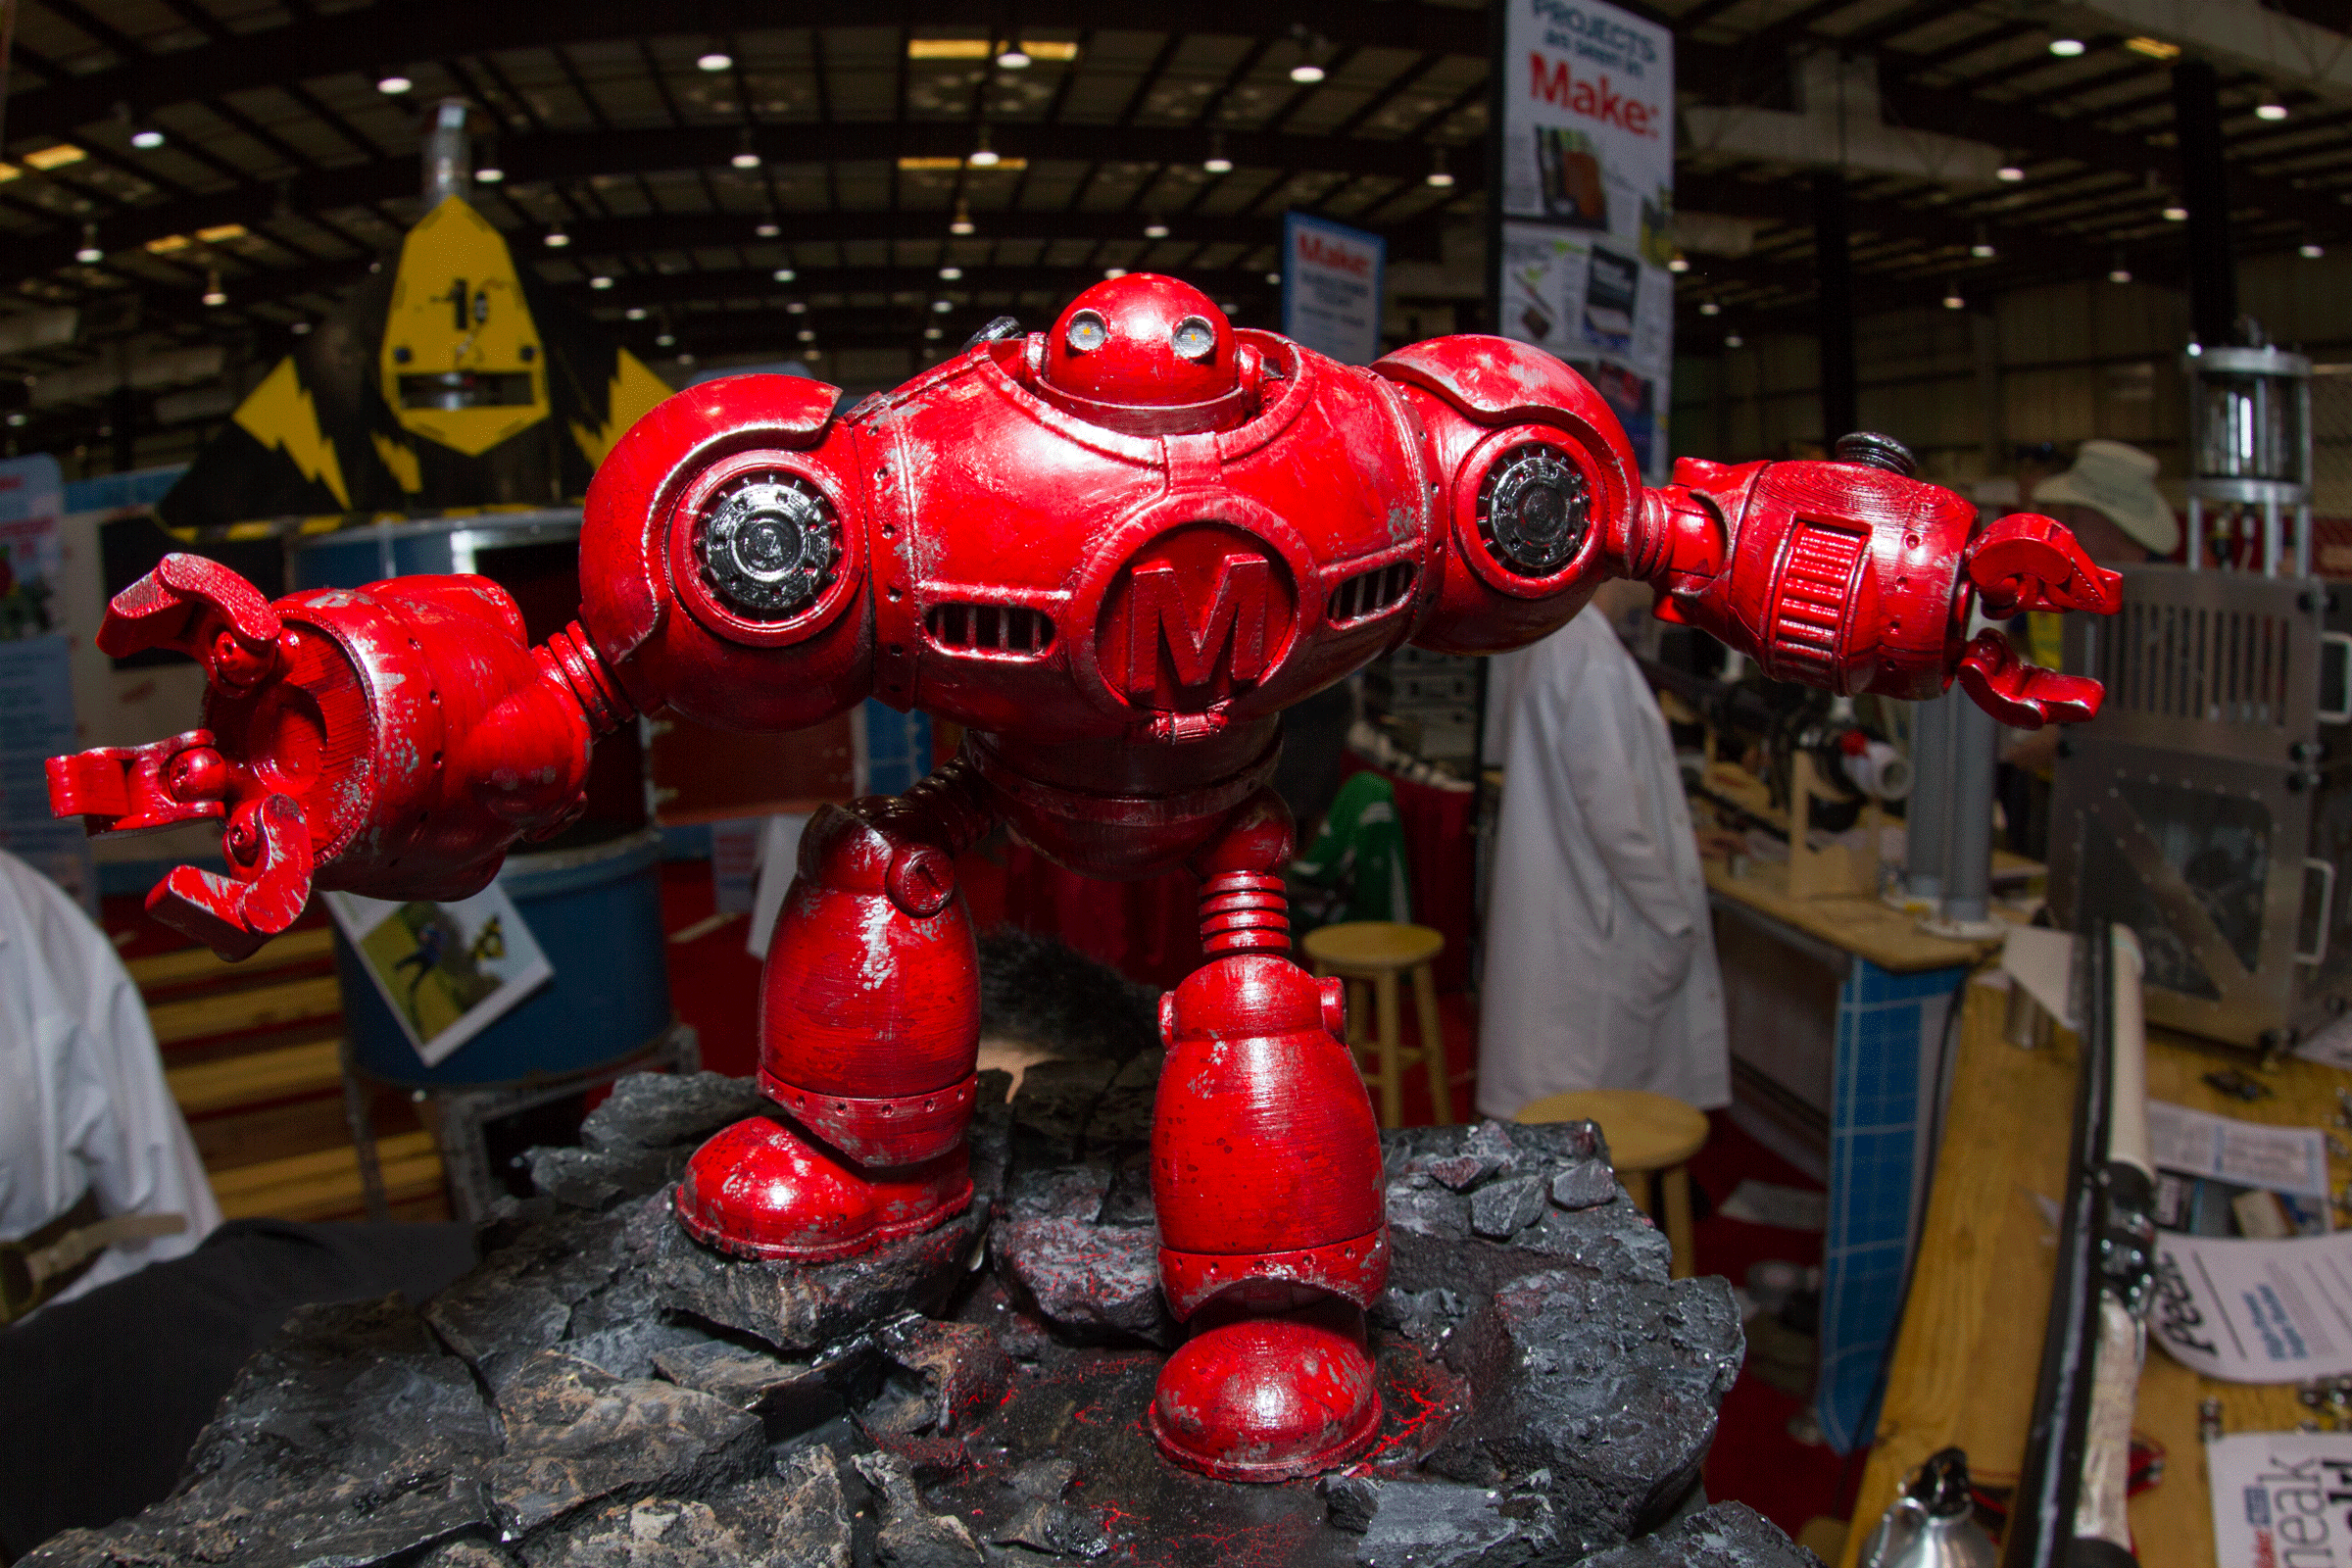 Bay Area Maker Faire: Call for Makers Ends February 23